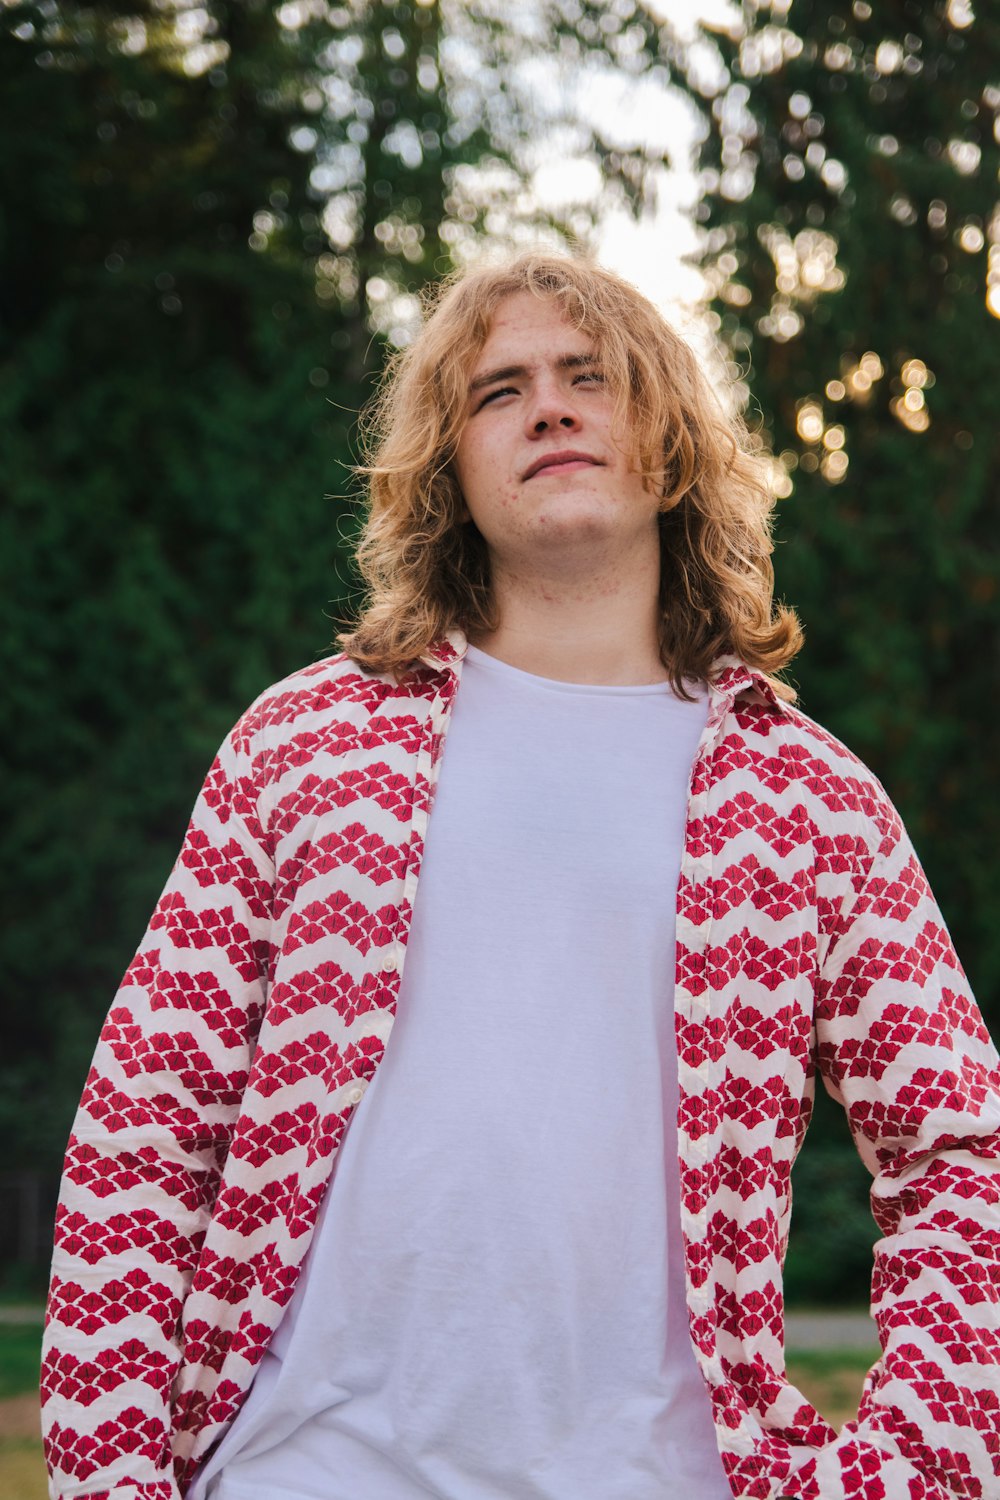 a man with long hair wearing a red and white sweater